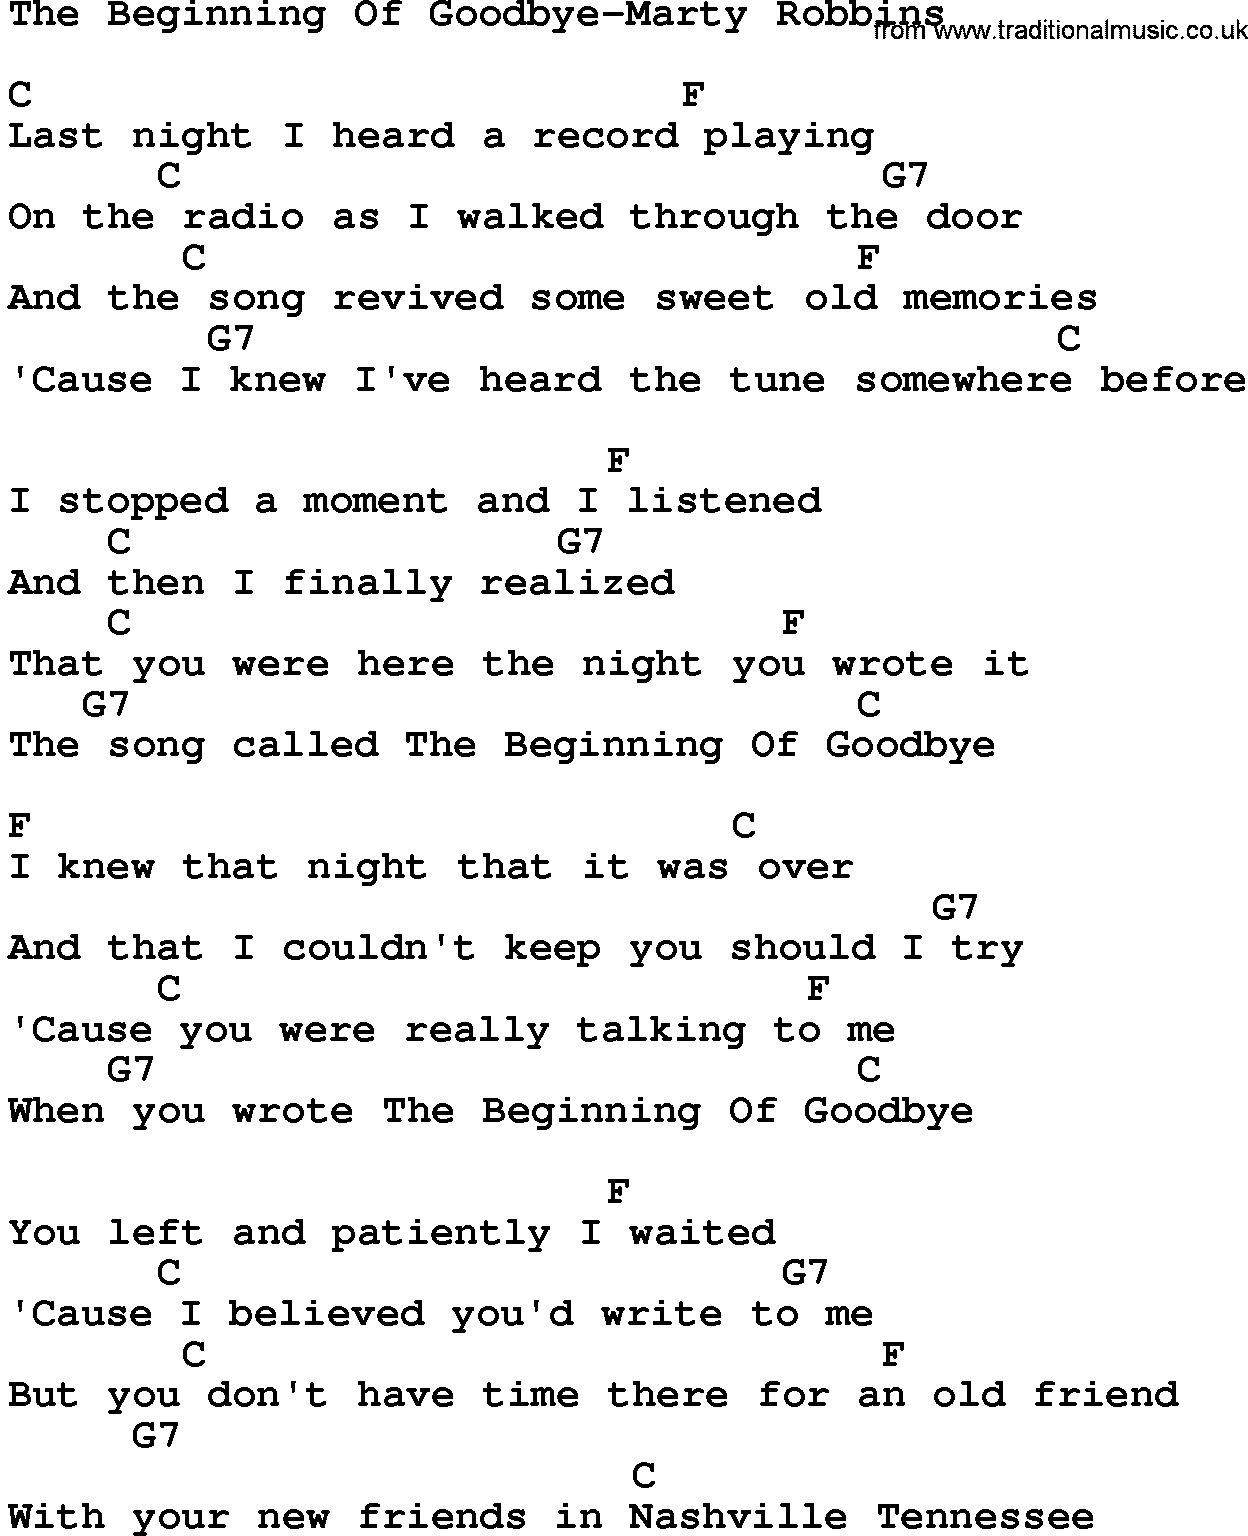 Country music song: The Beginning Of Goodbye-Marty Robbins lyrics and chords